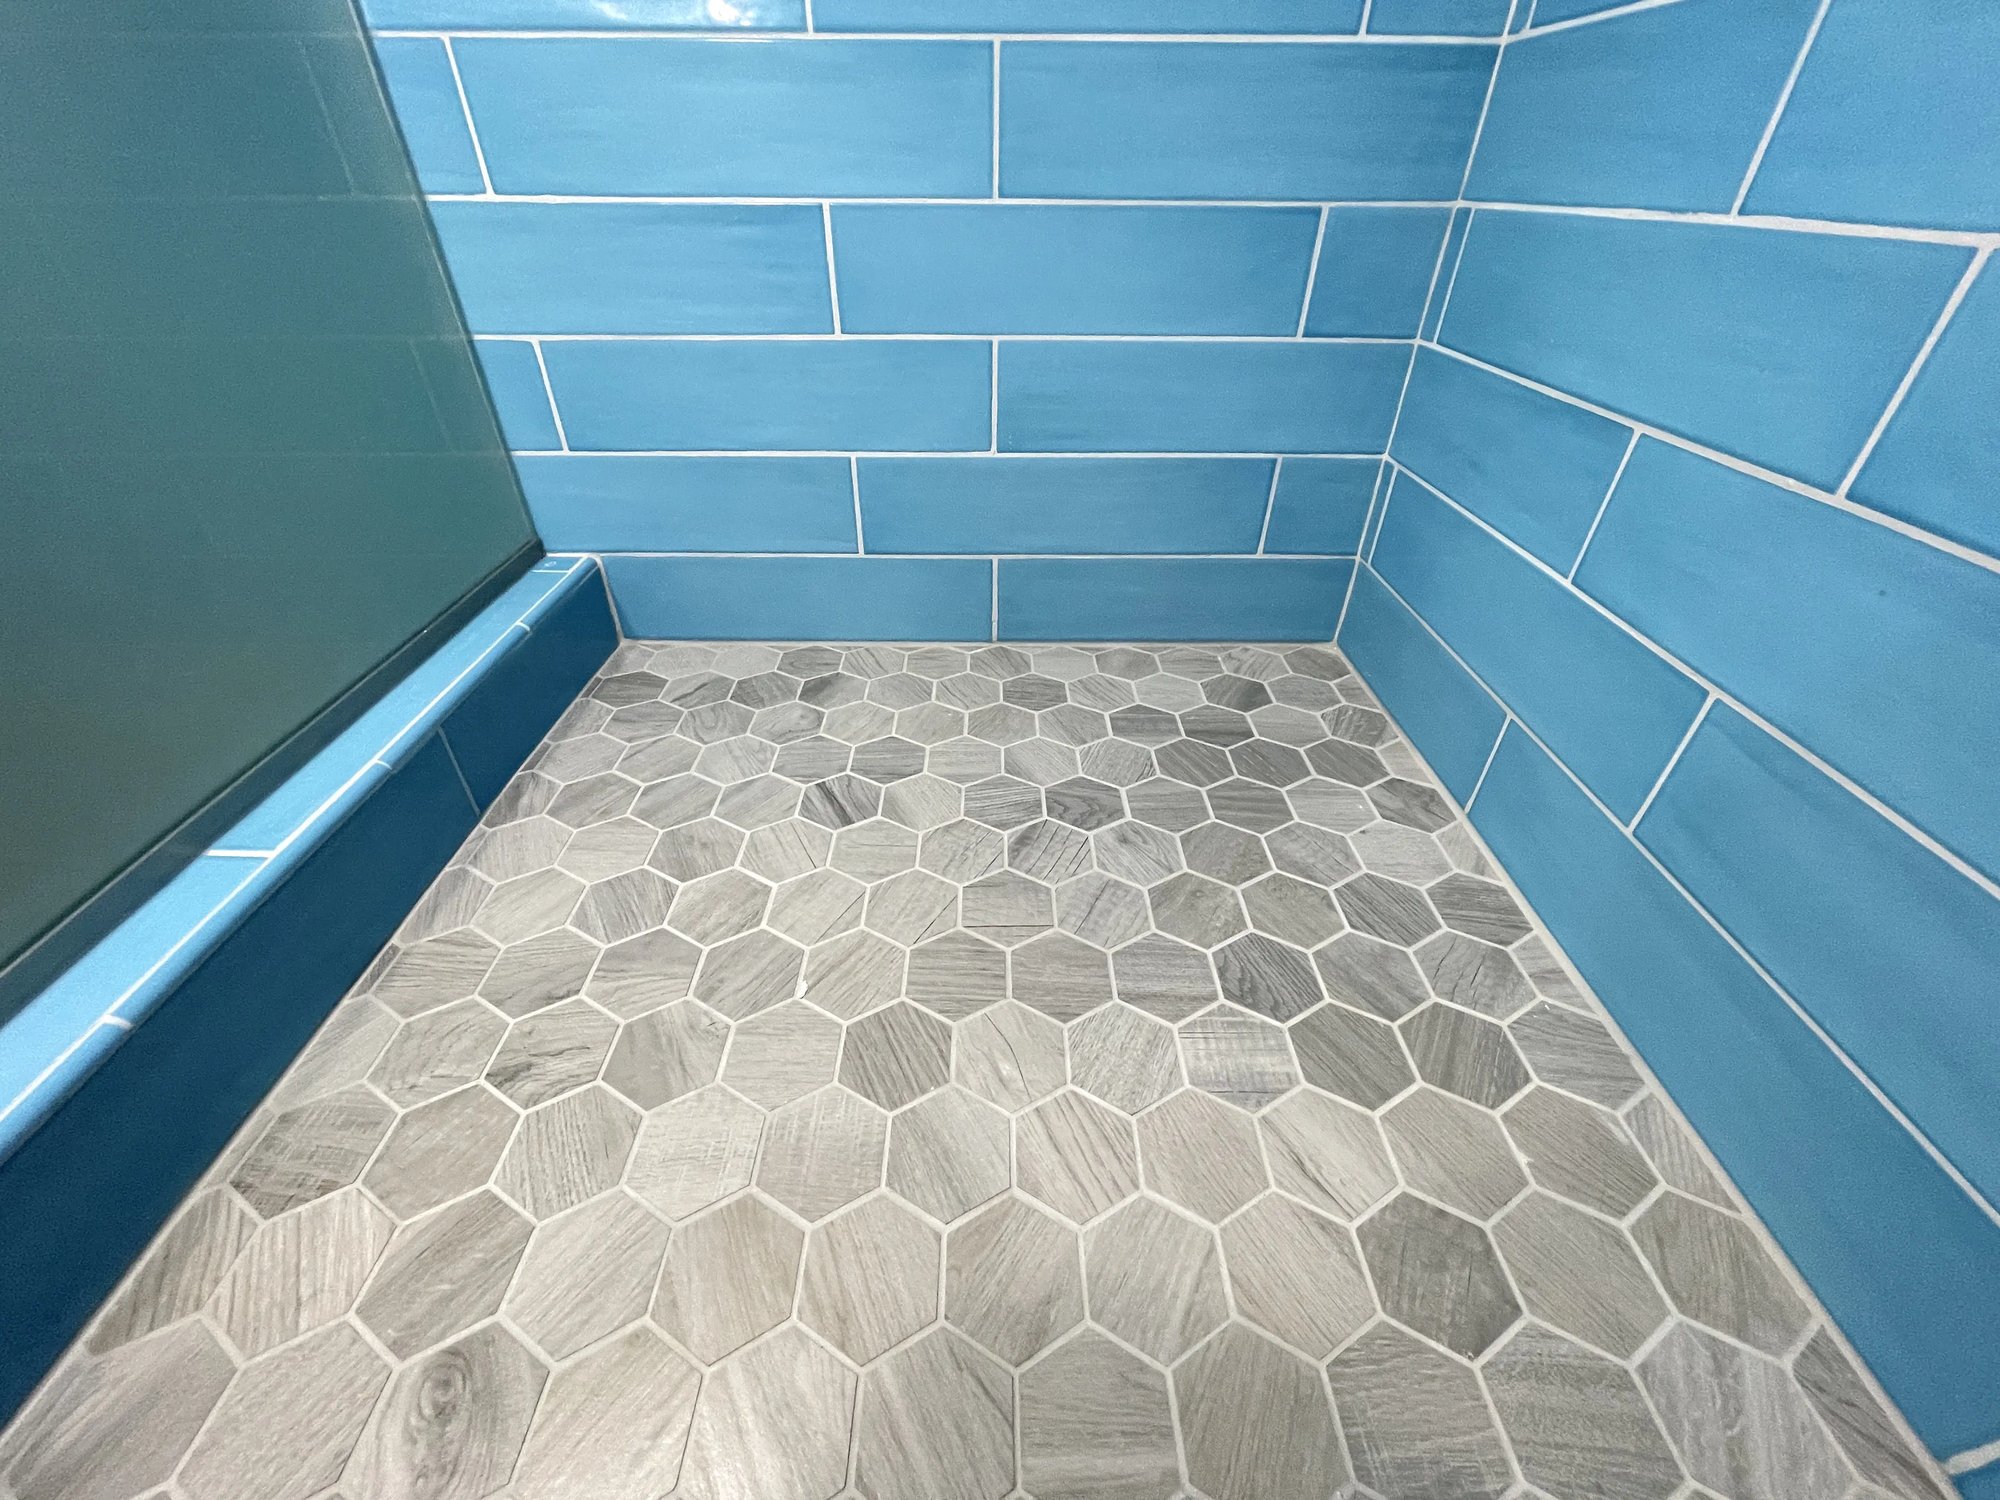 Gray carrara hex tile was used for the shower floor of this master bathroom remodel.